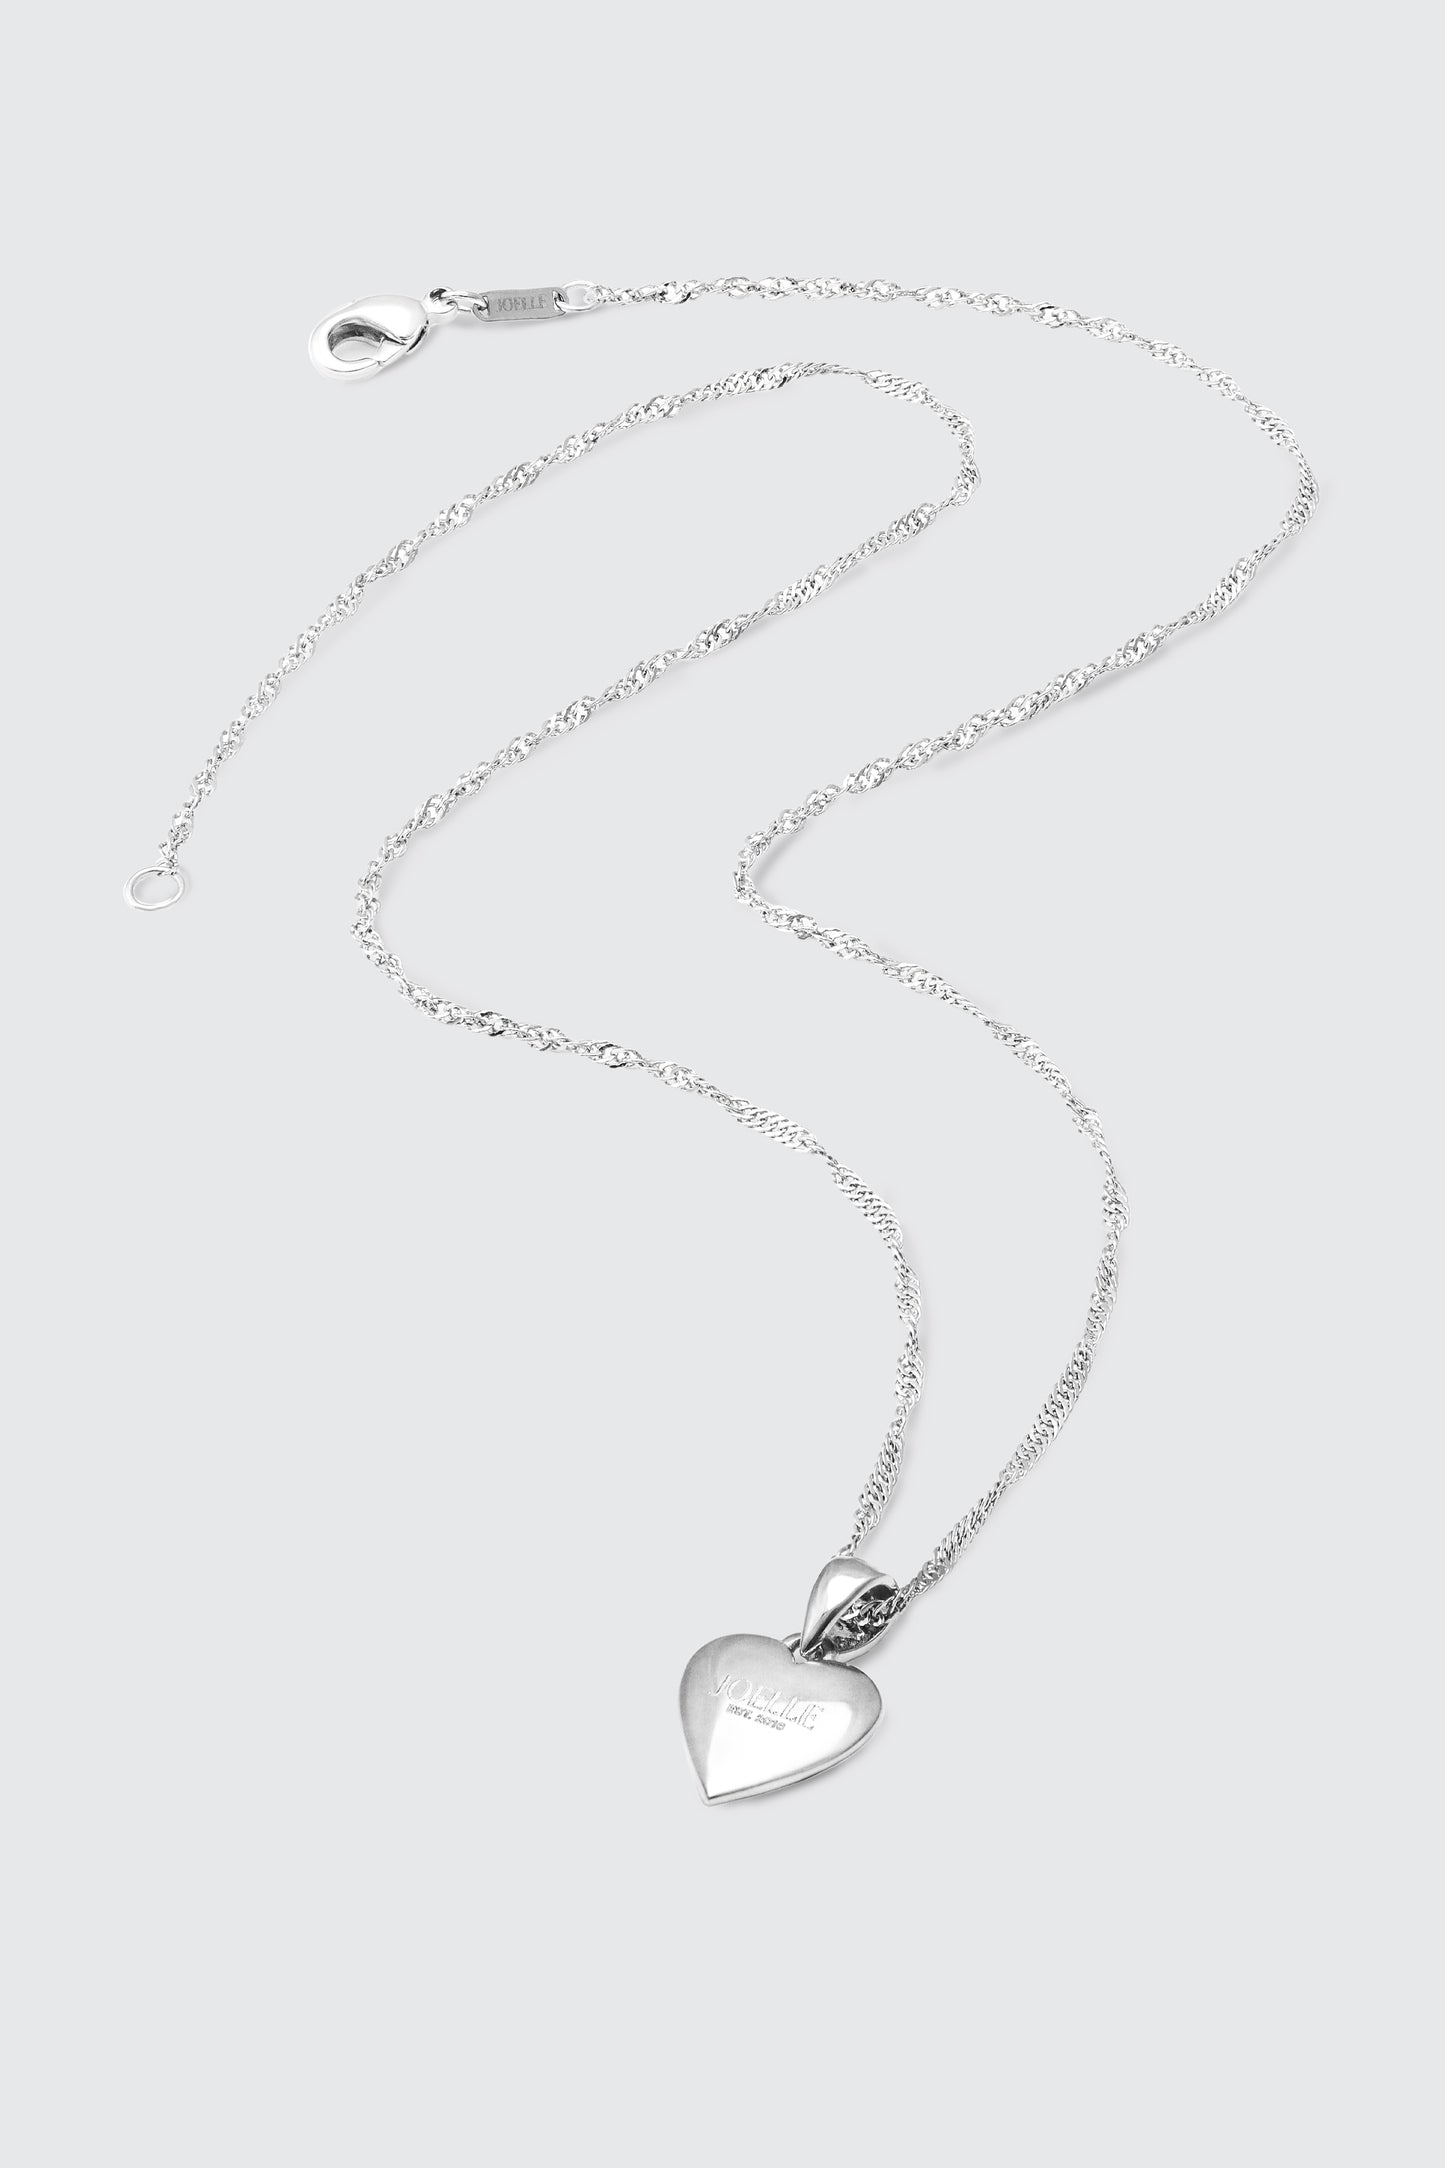 Silver necklace with heart pendant | Ridge